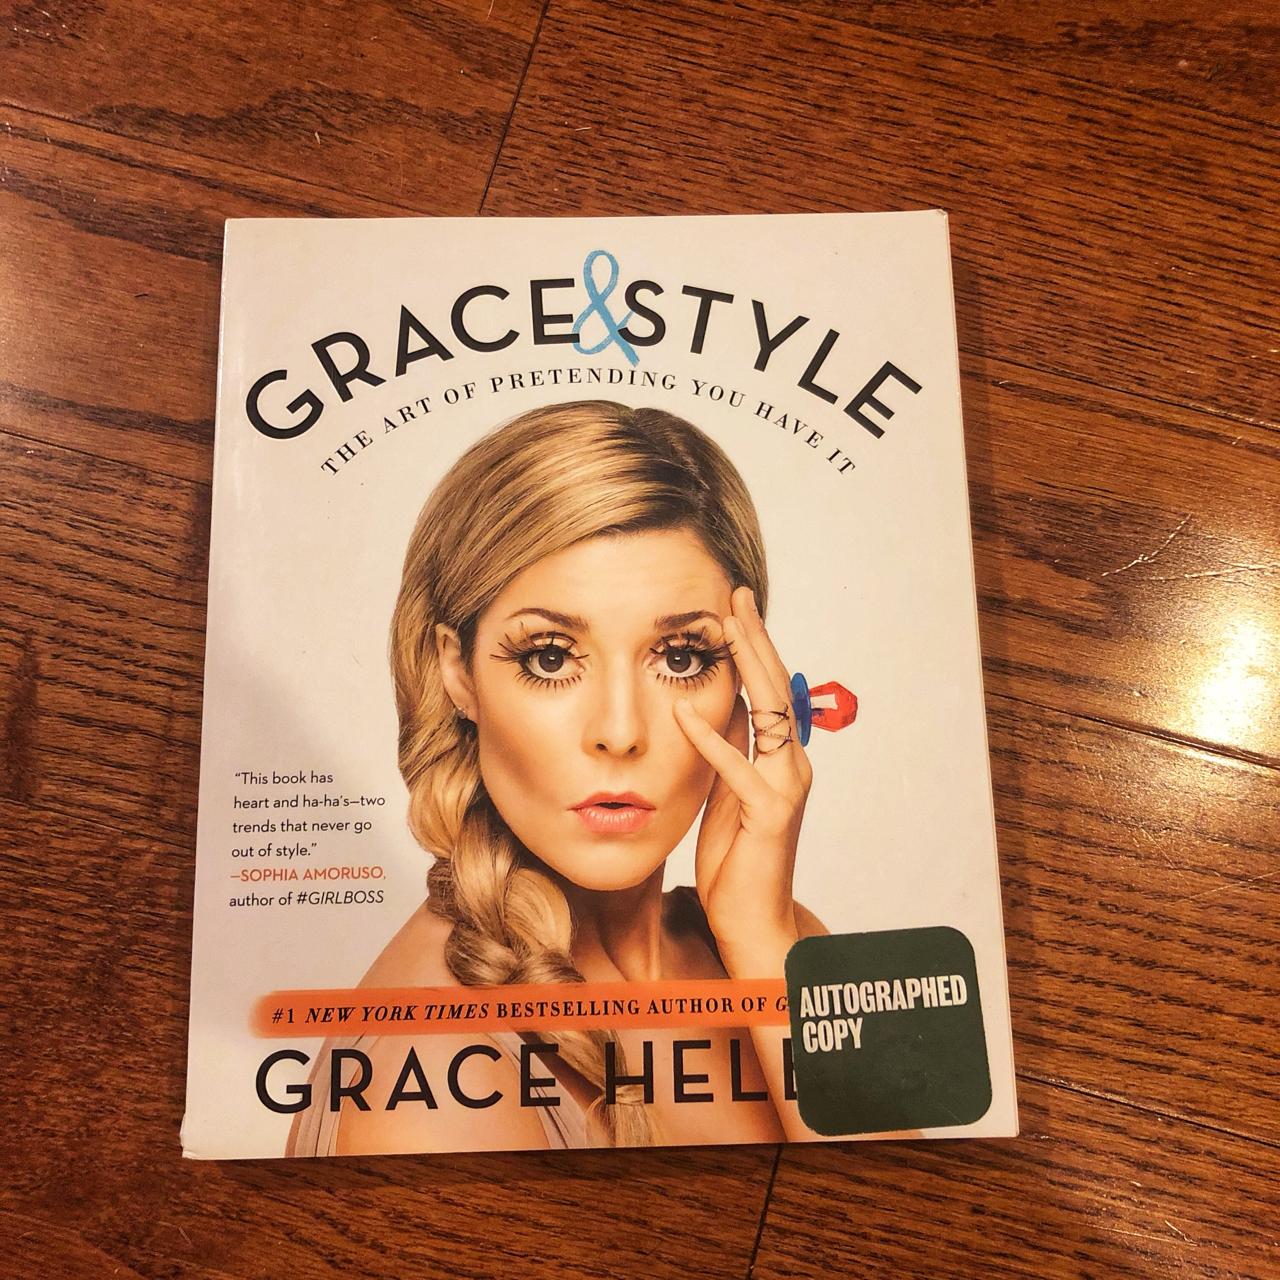 Grace & Style: The Art of Pretending You by Helbig, Grace